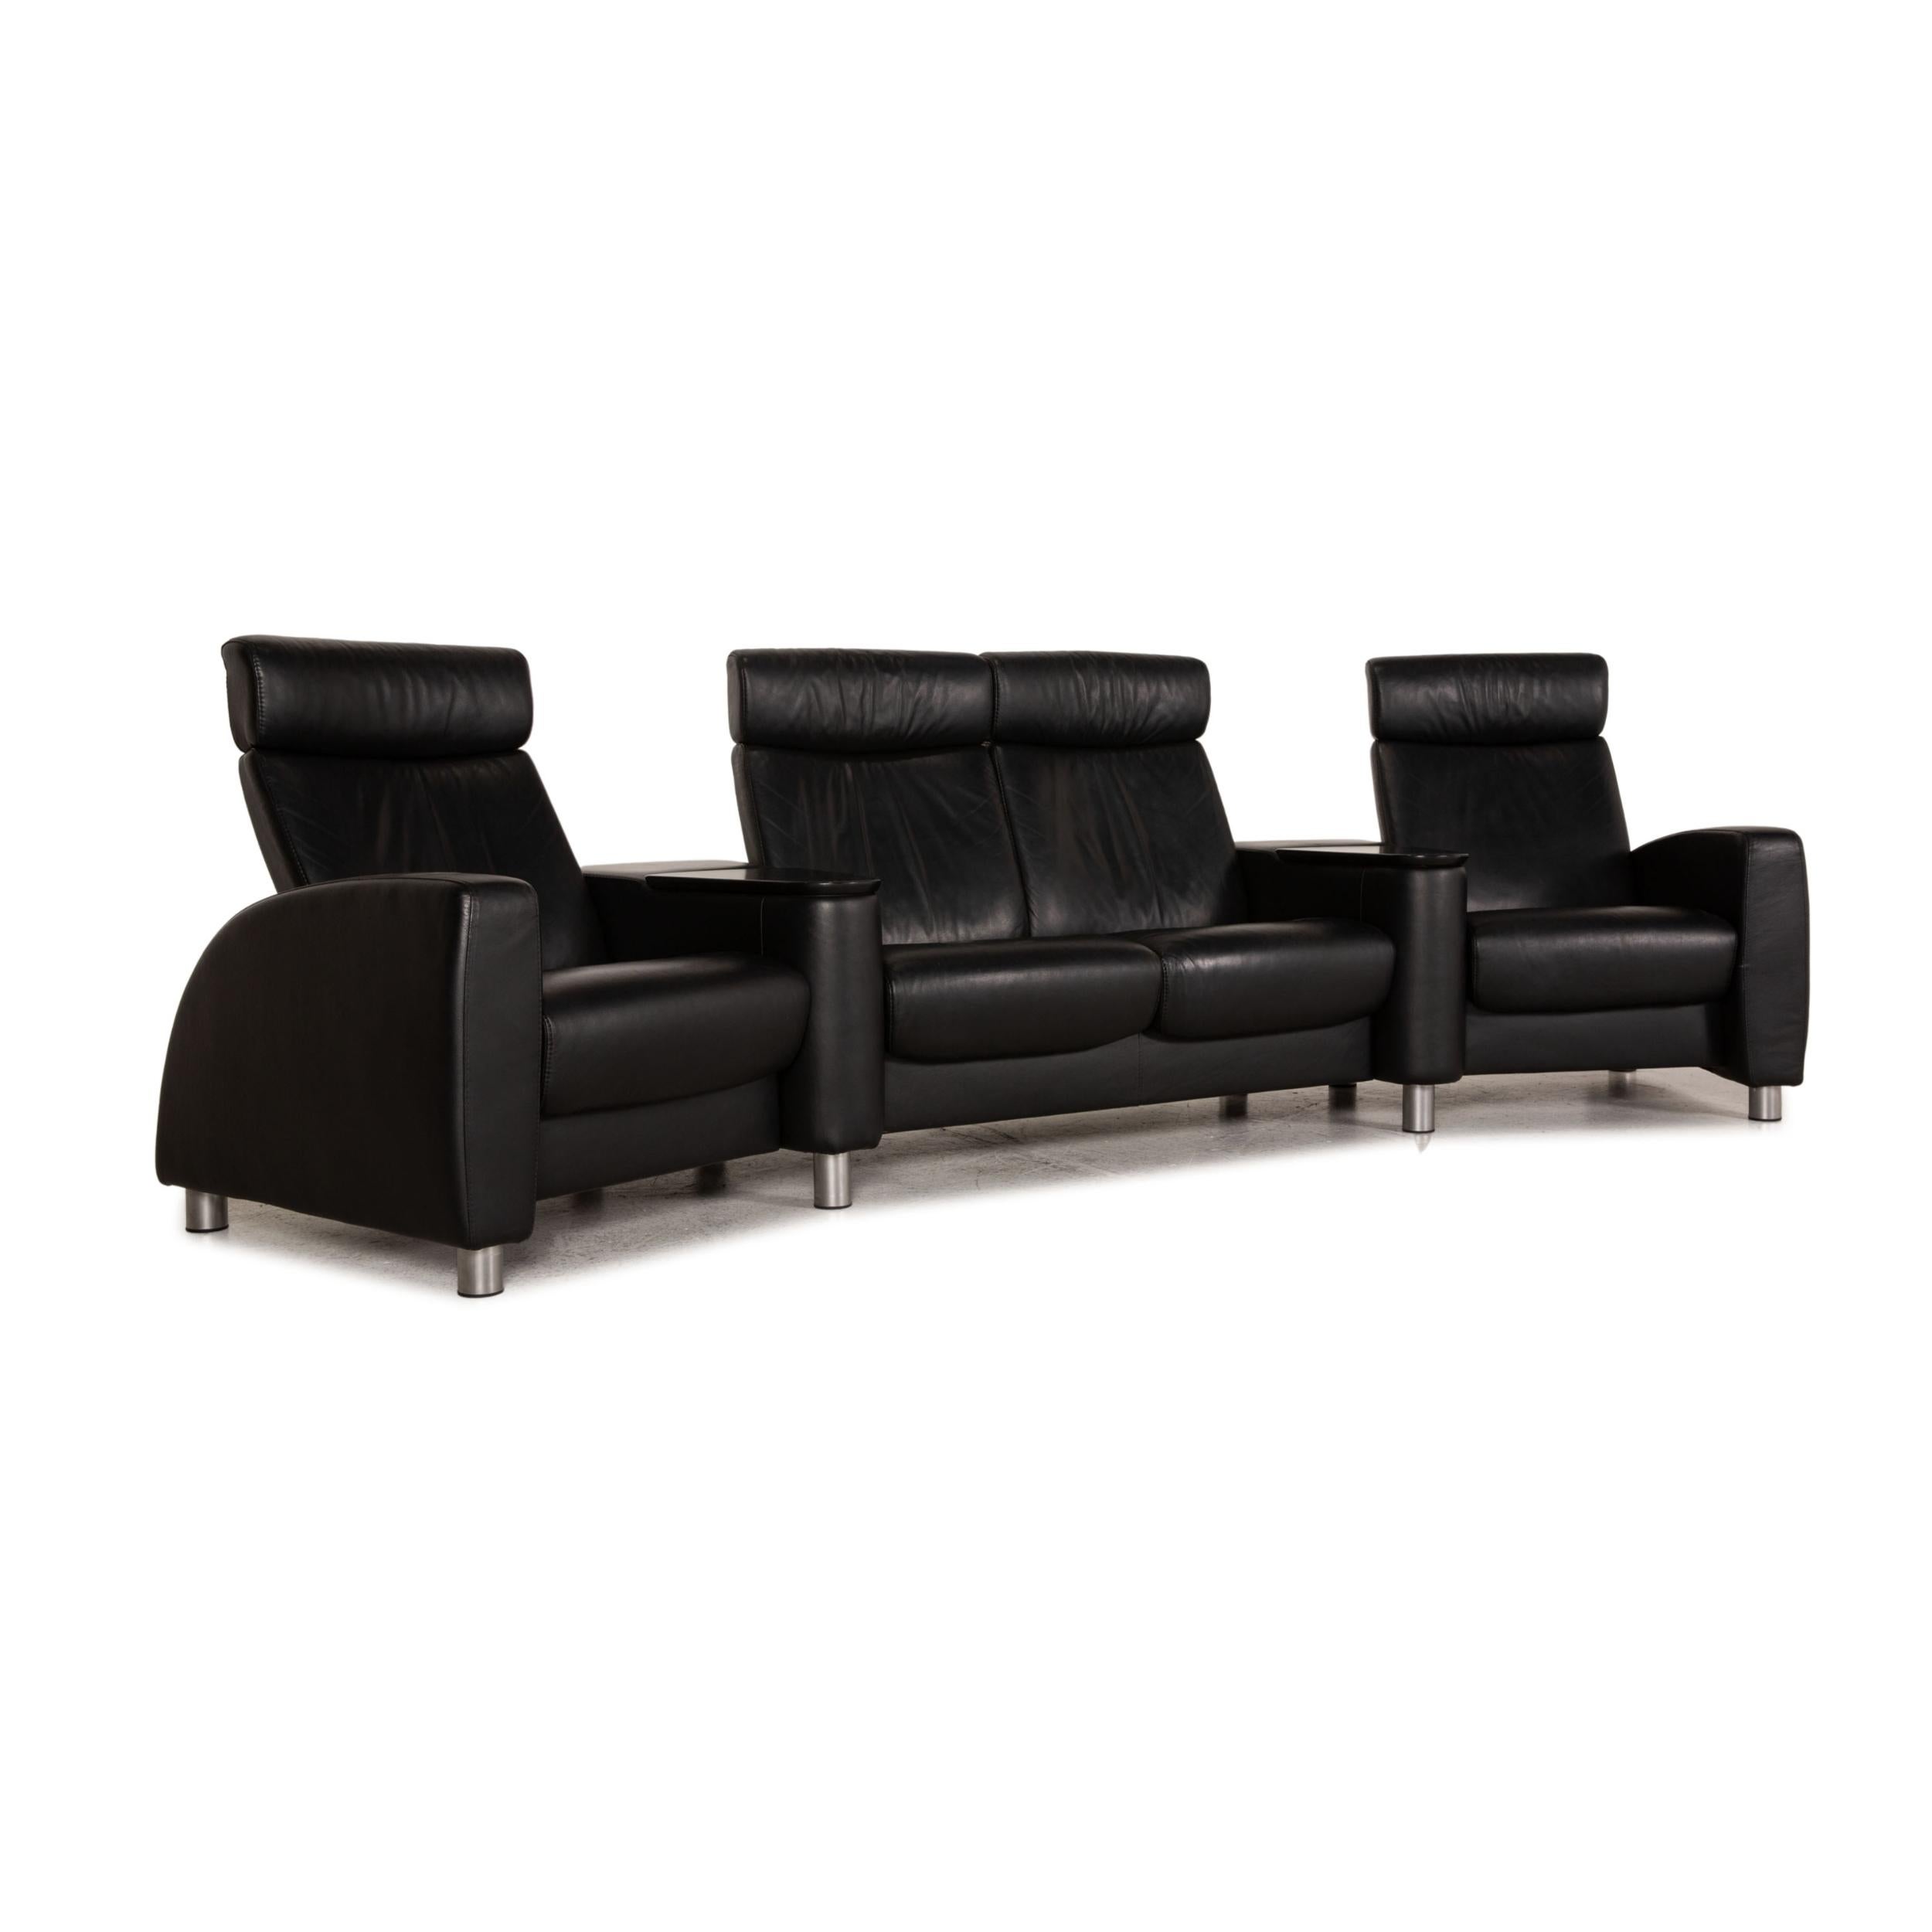 Stressless Arion Leather Sofa Black Four Seater Couch Feature For Sale 4